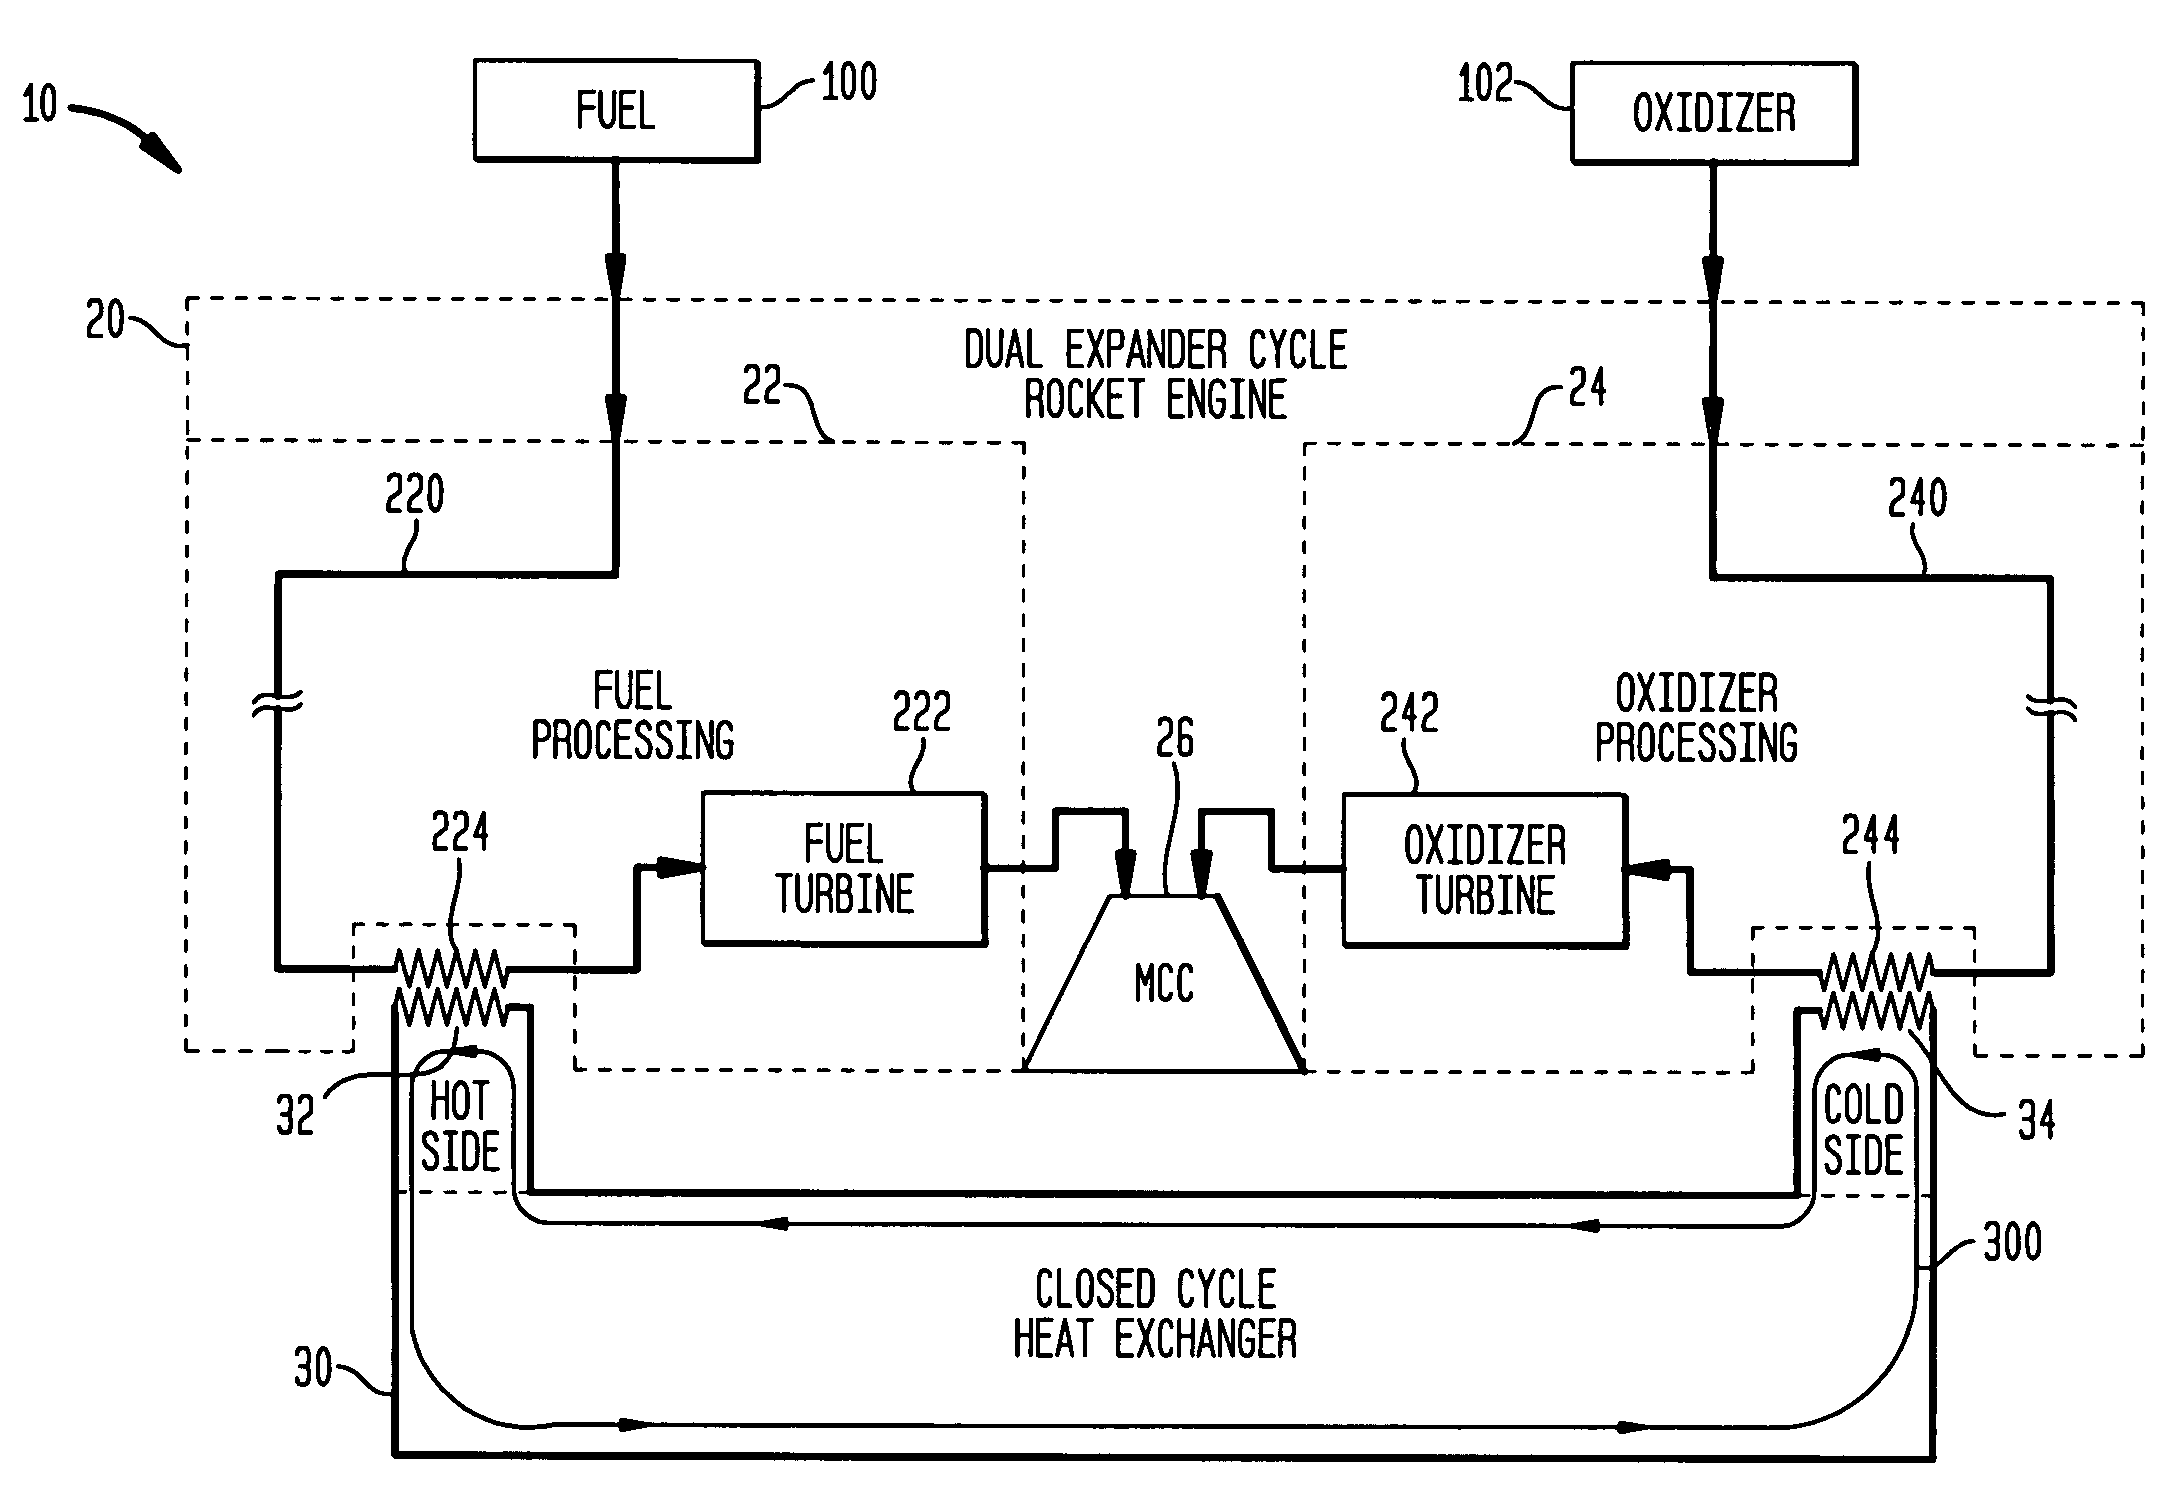 Dual expander cycle rocket engine with an intermediate, closed-cycle heat exchanger